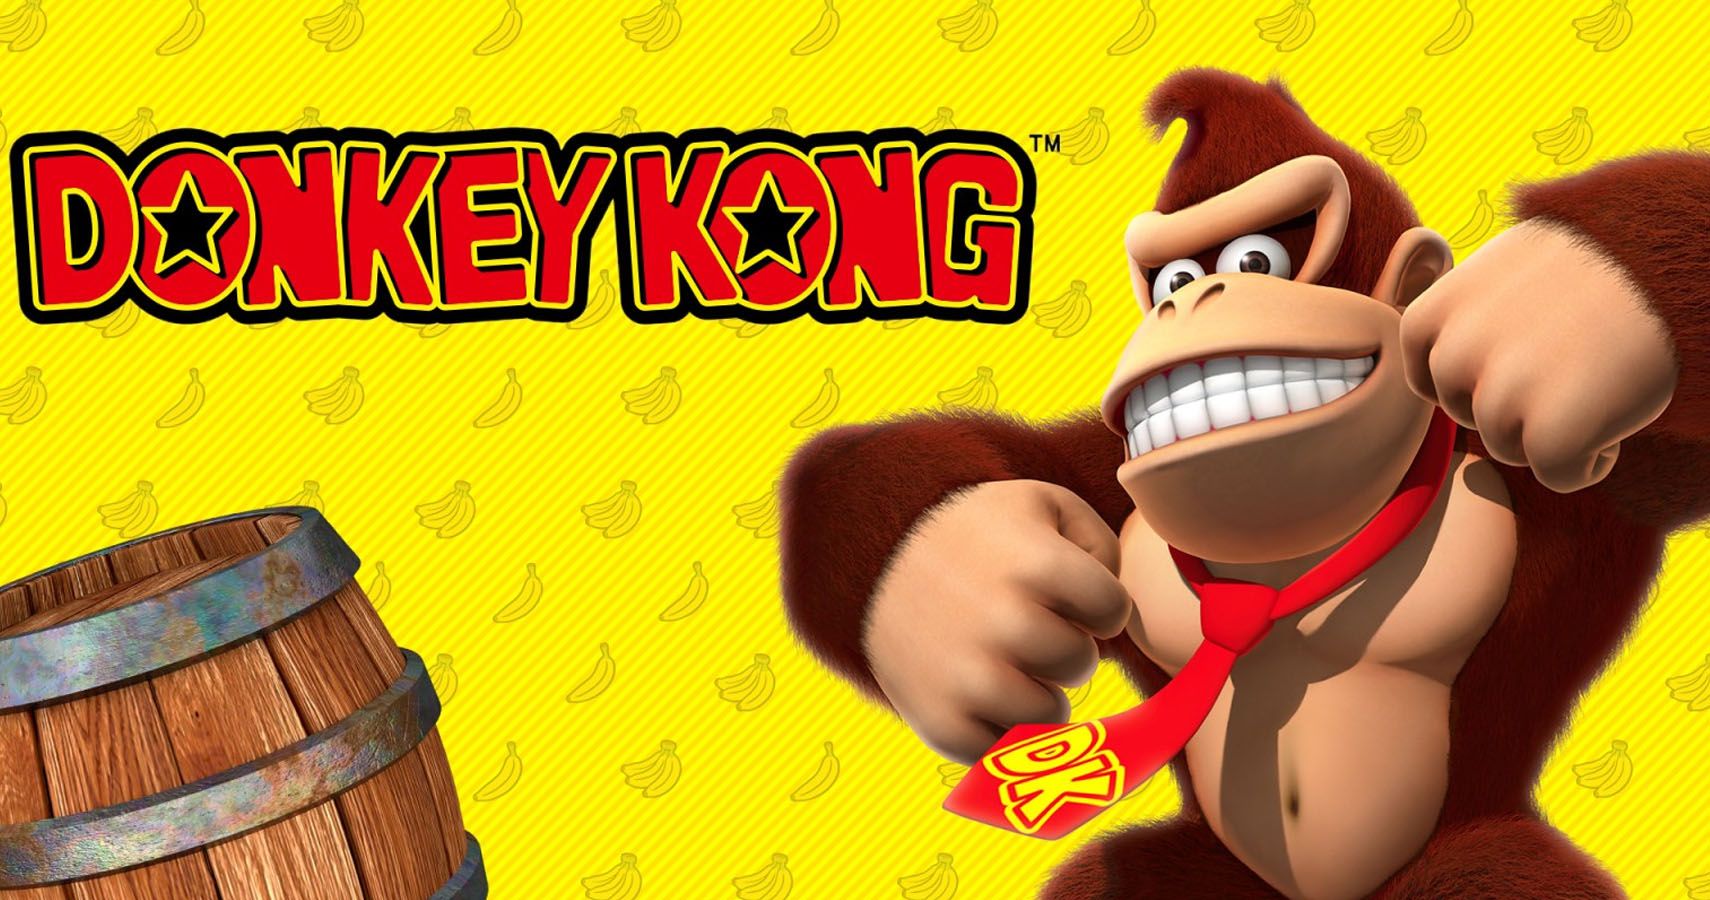 Battle Chess and Donkey Kong Video Games Crossover